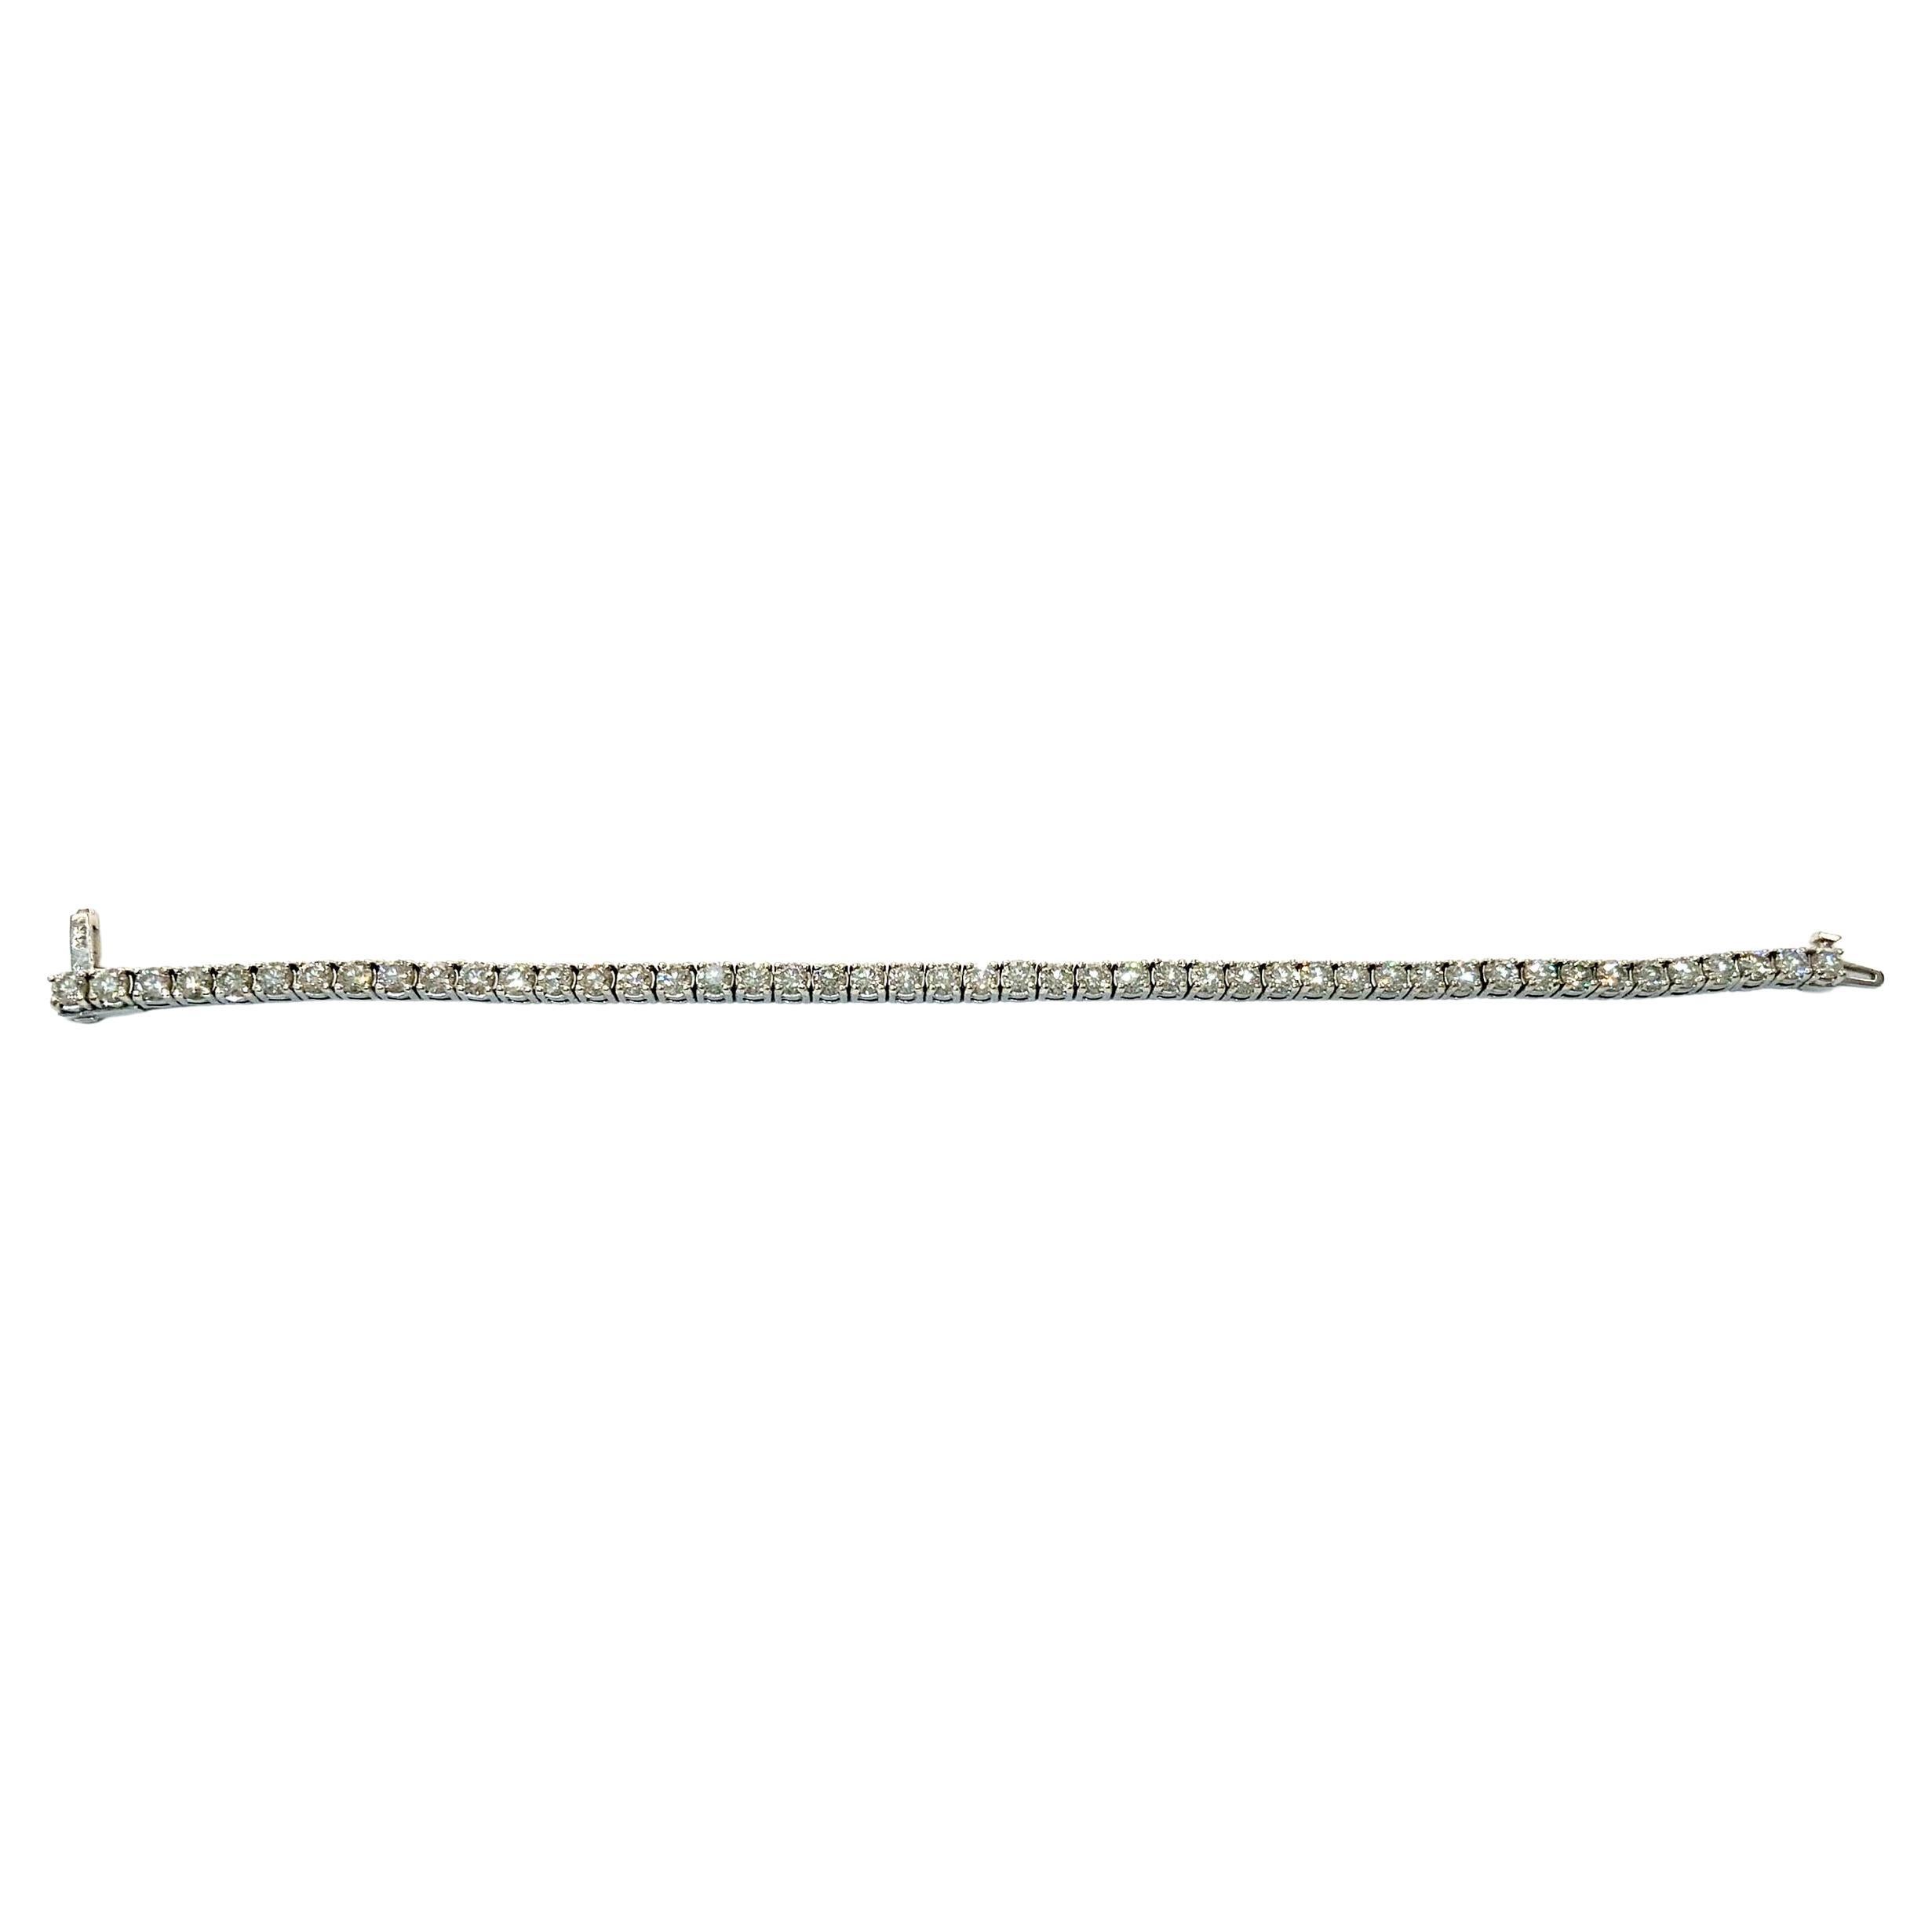 Designed to hold 8.20 Carat Diamond VS1 ( Fine Quality ) in G Color, this classic and gorgeous tennis Bracelet in White Gold has 47 Sparkling round brilliant cut diamonds. This sophisticated tennis bracelet keeps securely on the wrist when worn,